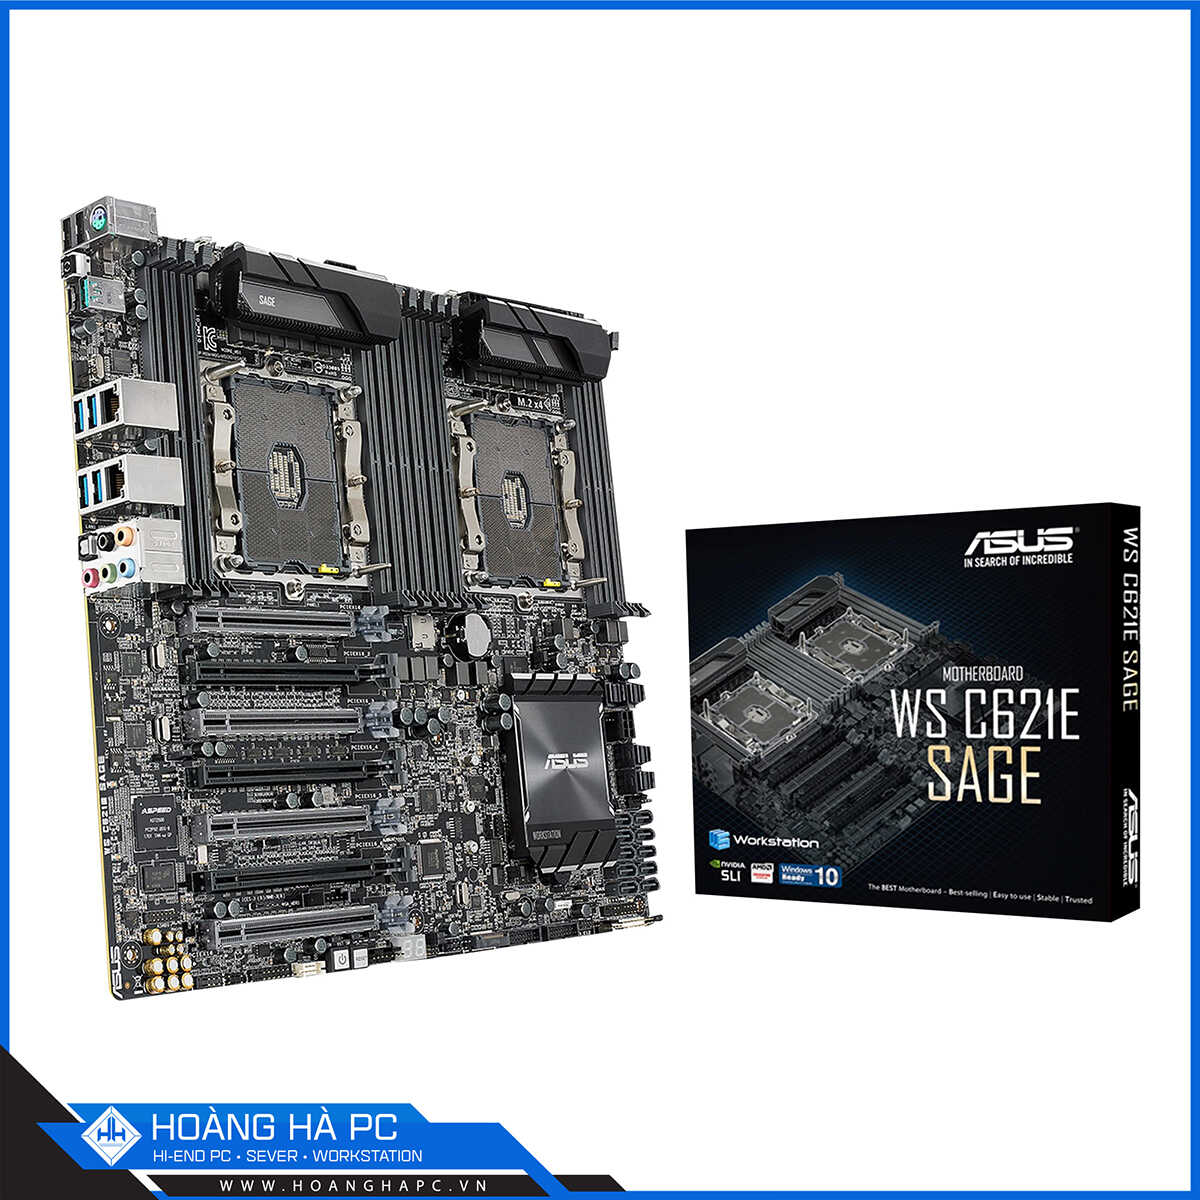 Mainboard ASUS WS C621E SAGE (Dual CPU Workstations) 